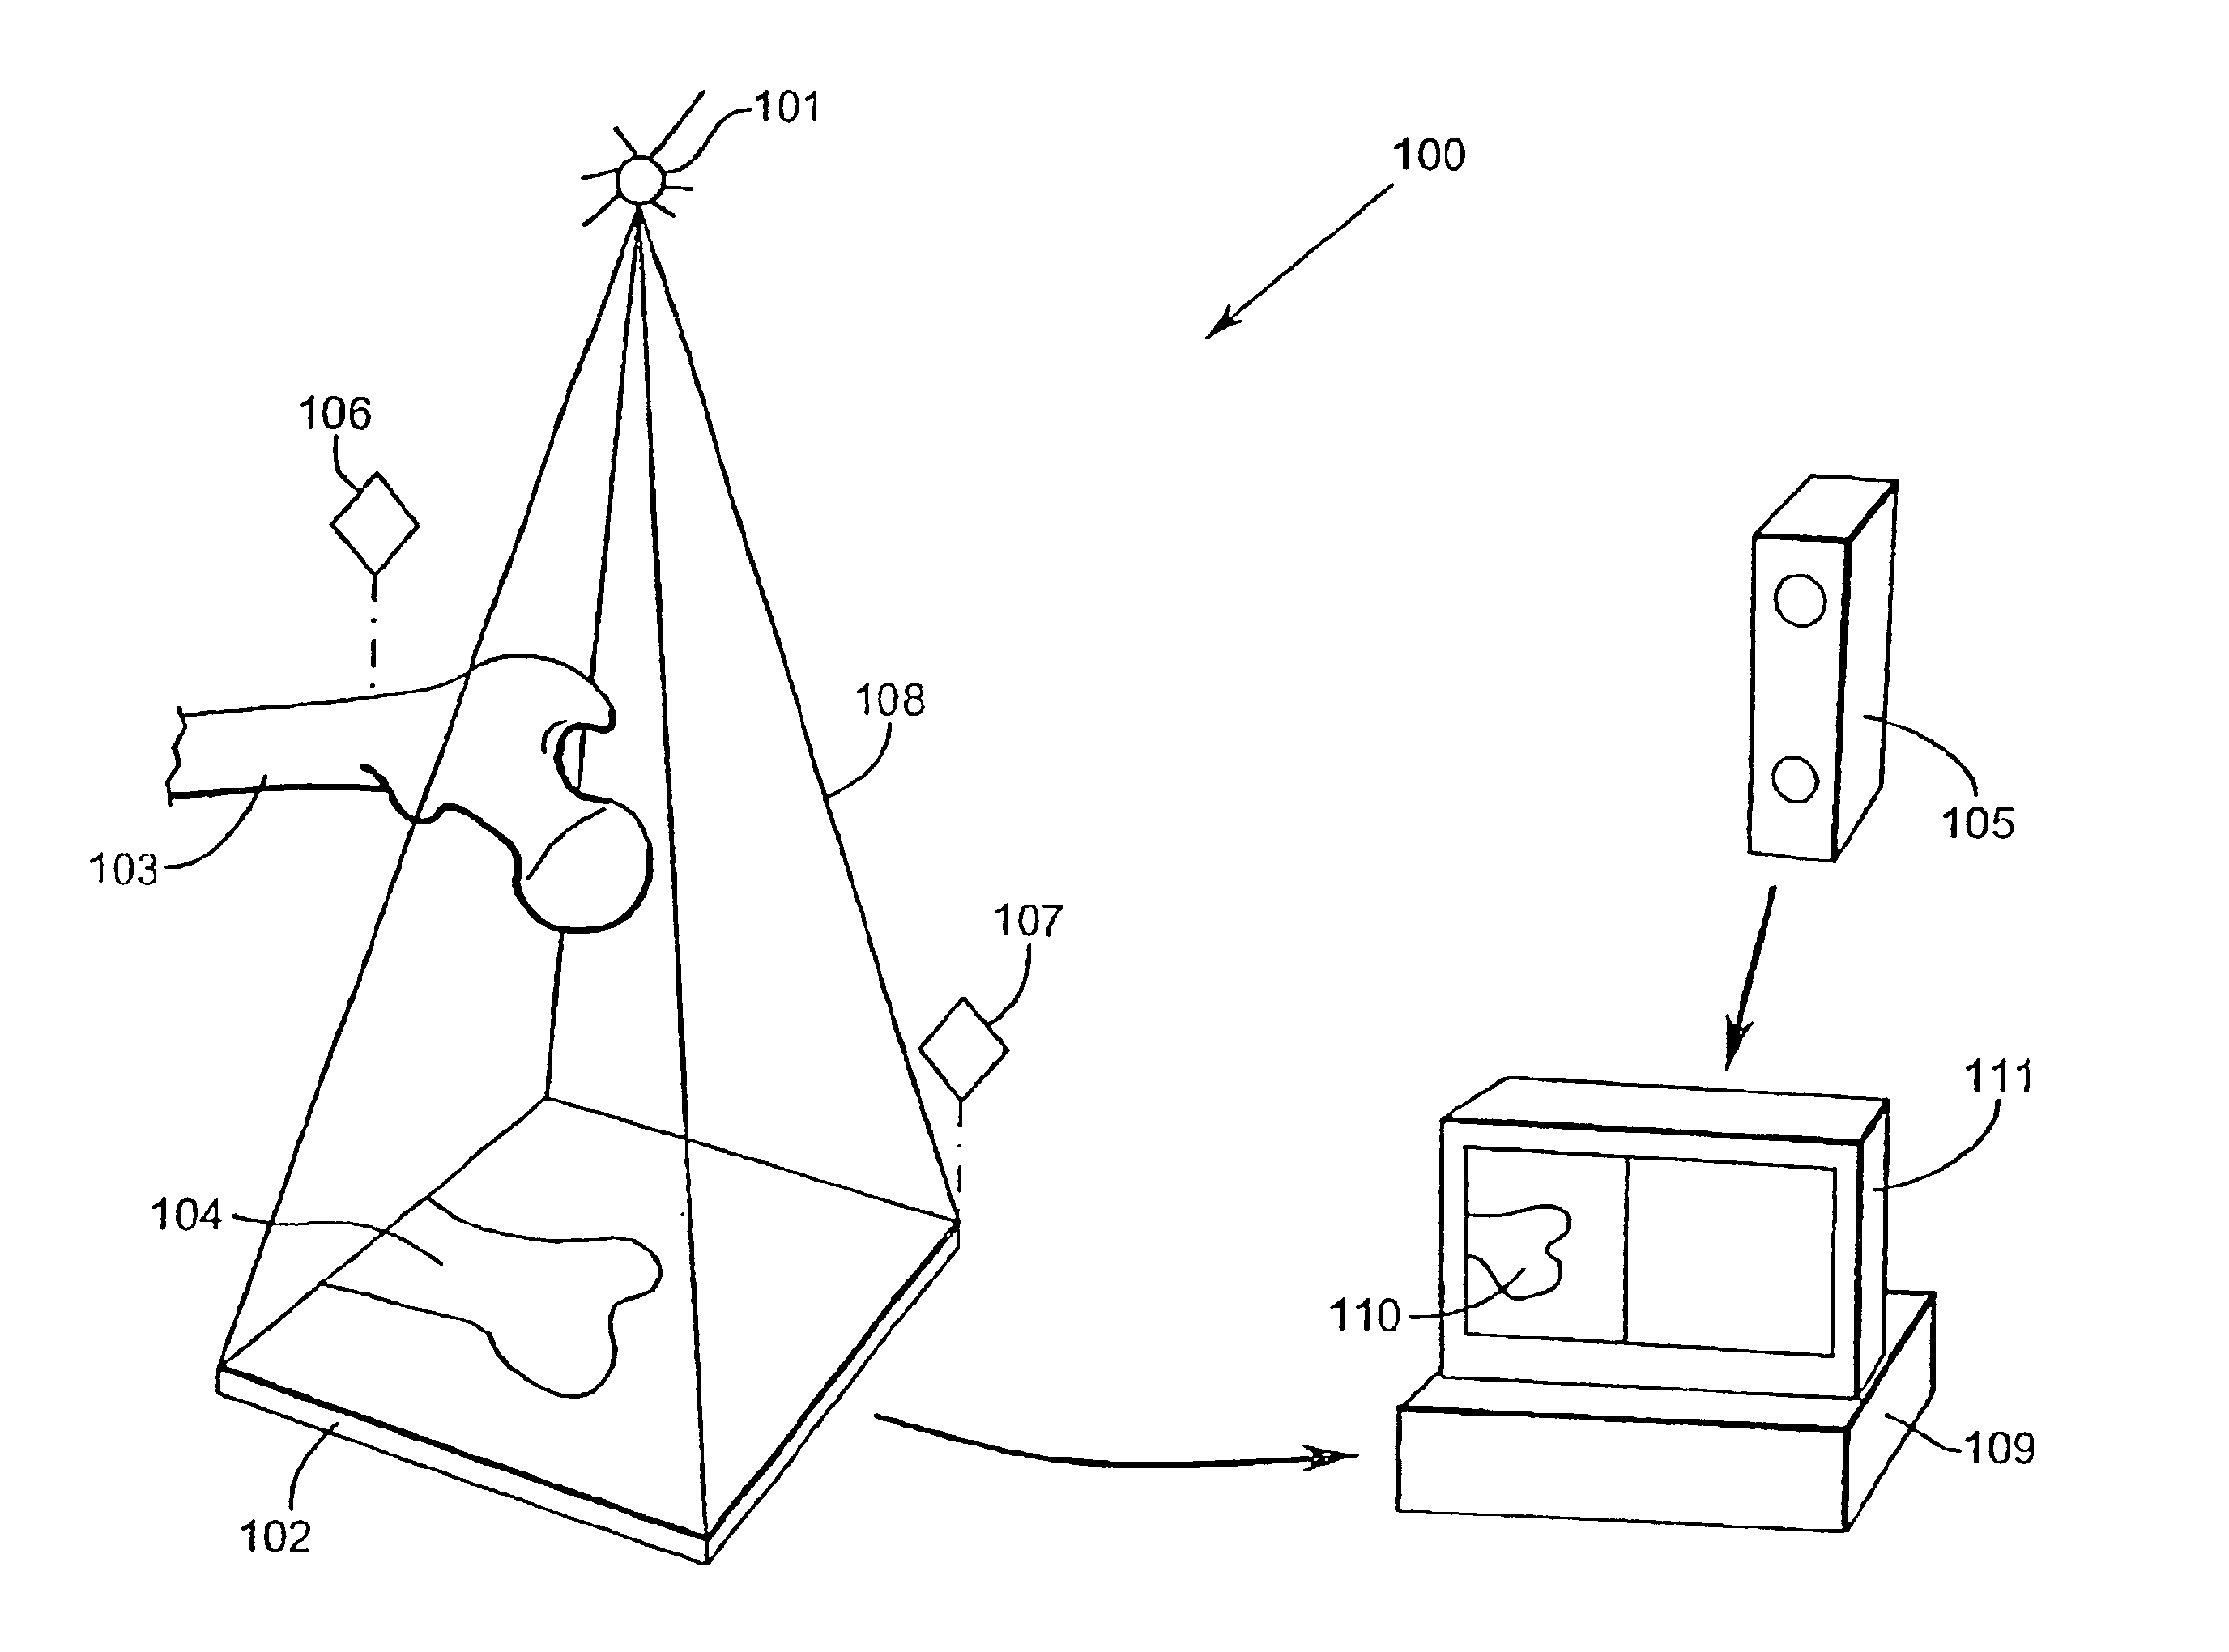 Apparatuses and methods for surgical navigation